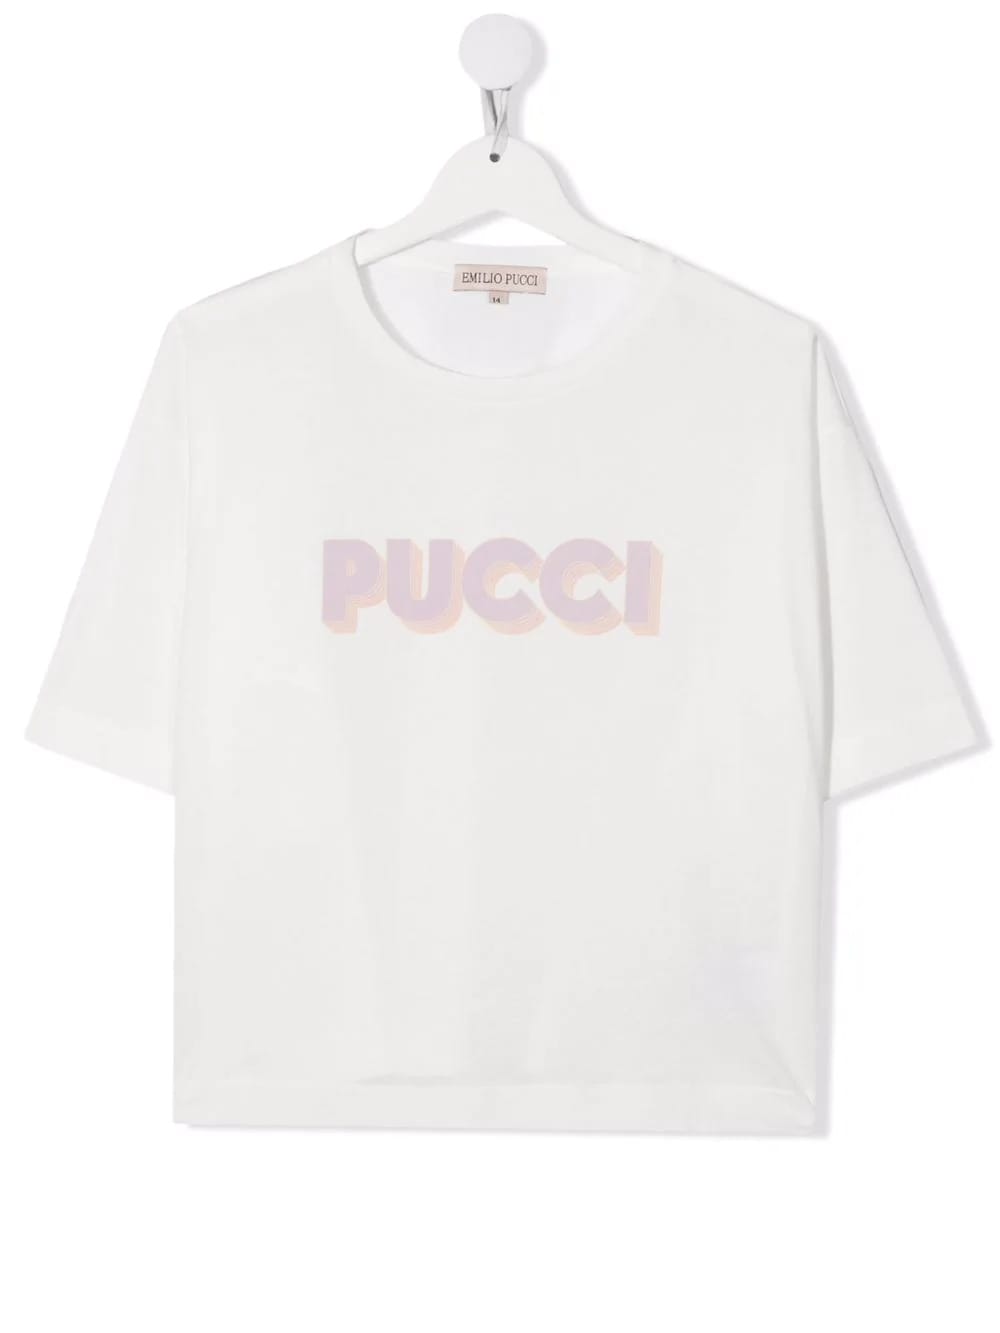 Emilio Pucci Kids White T-shirt With Pink 3d Logo